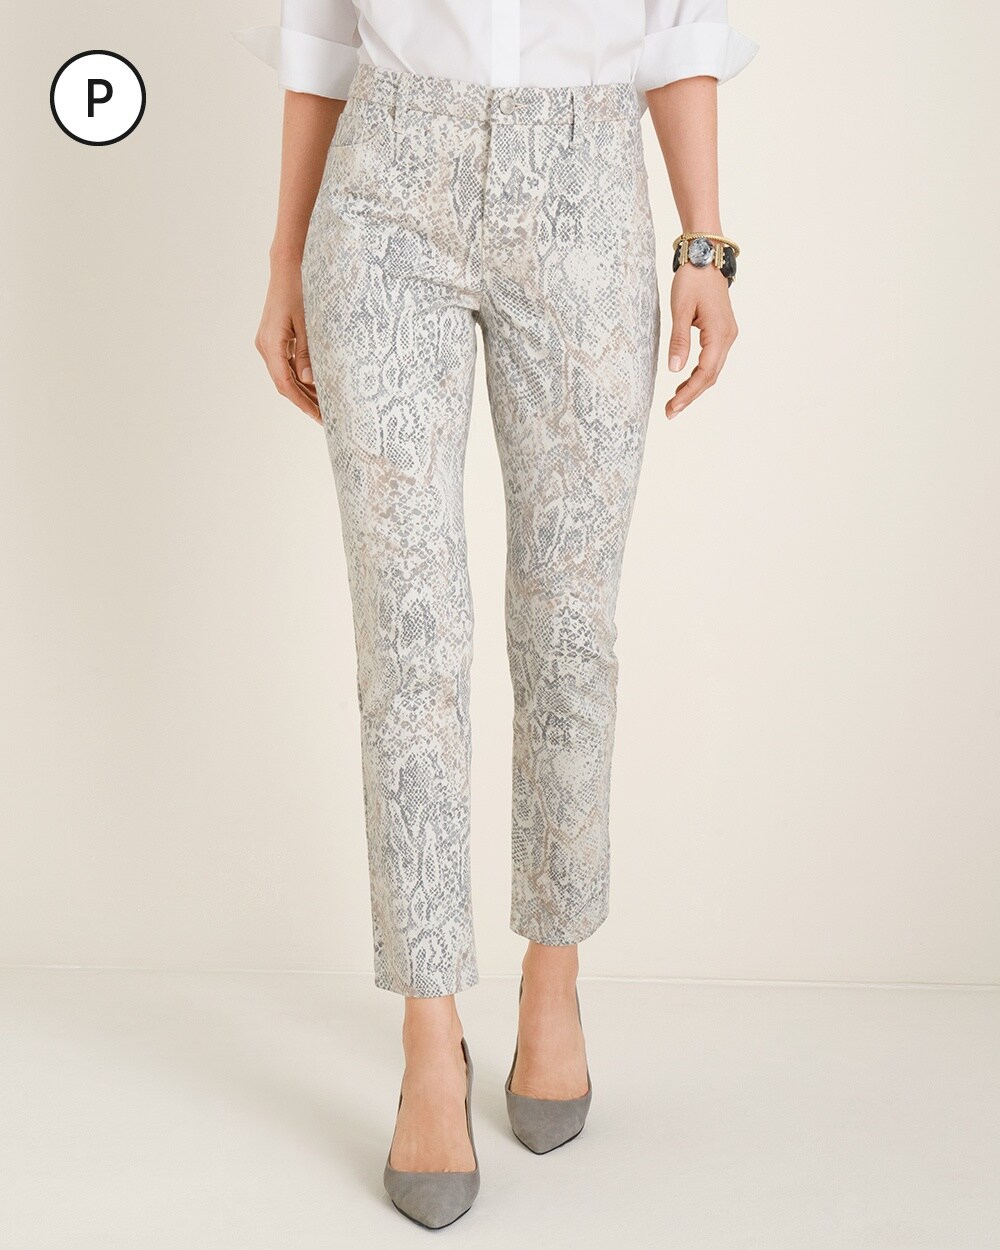 So Slimming Petite Python-Print Girlfriend Ankle Jeans